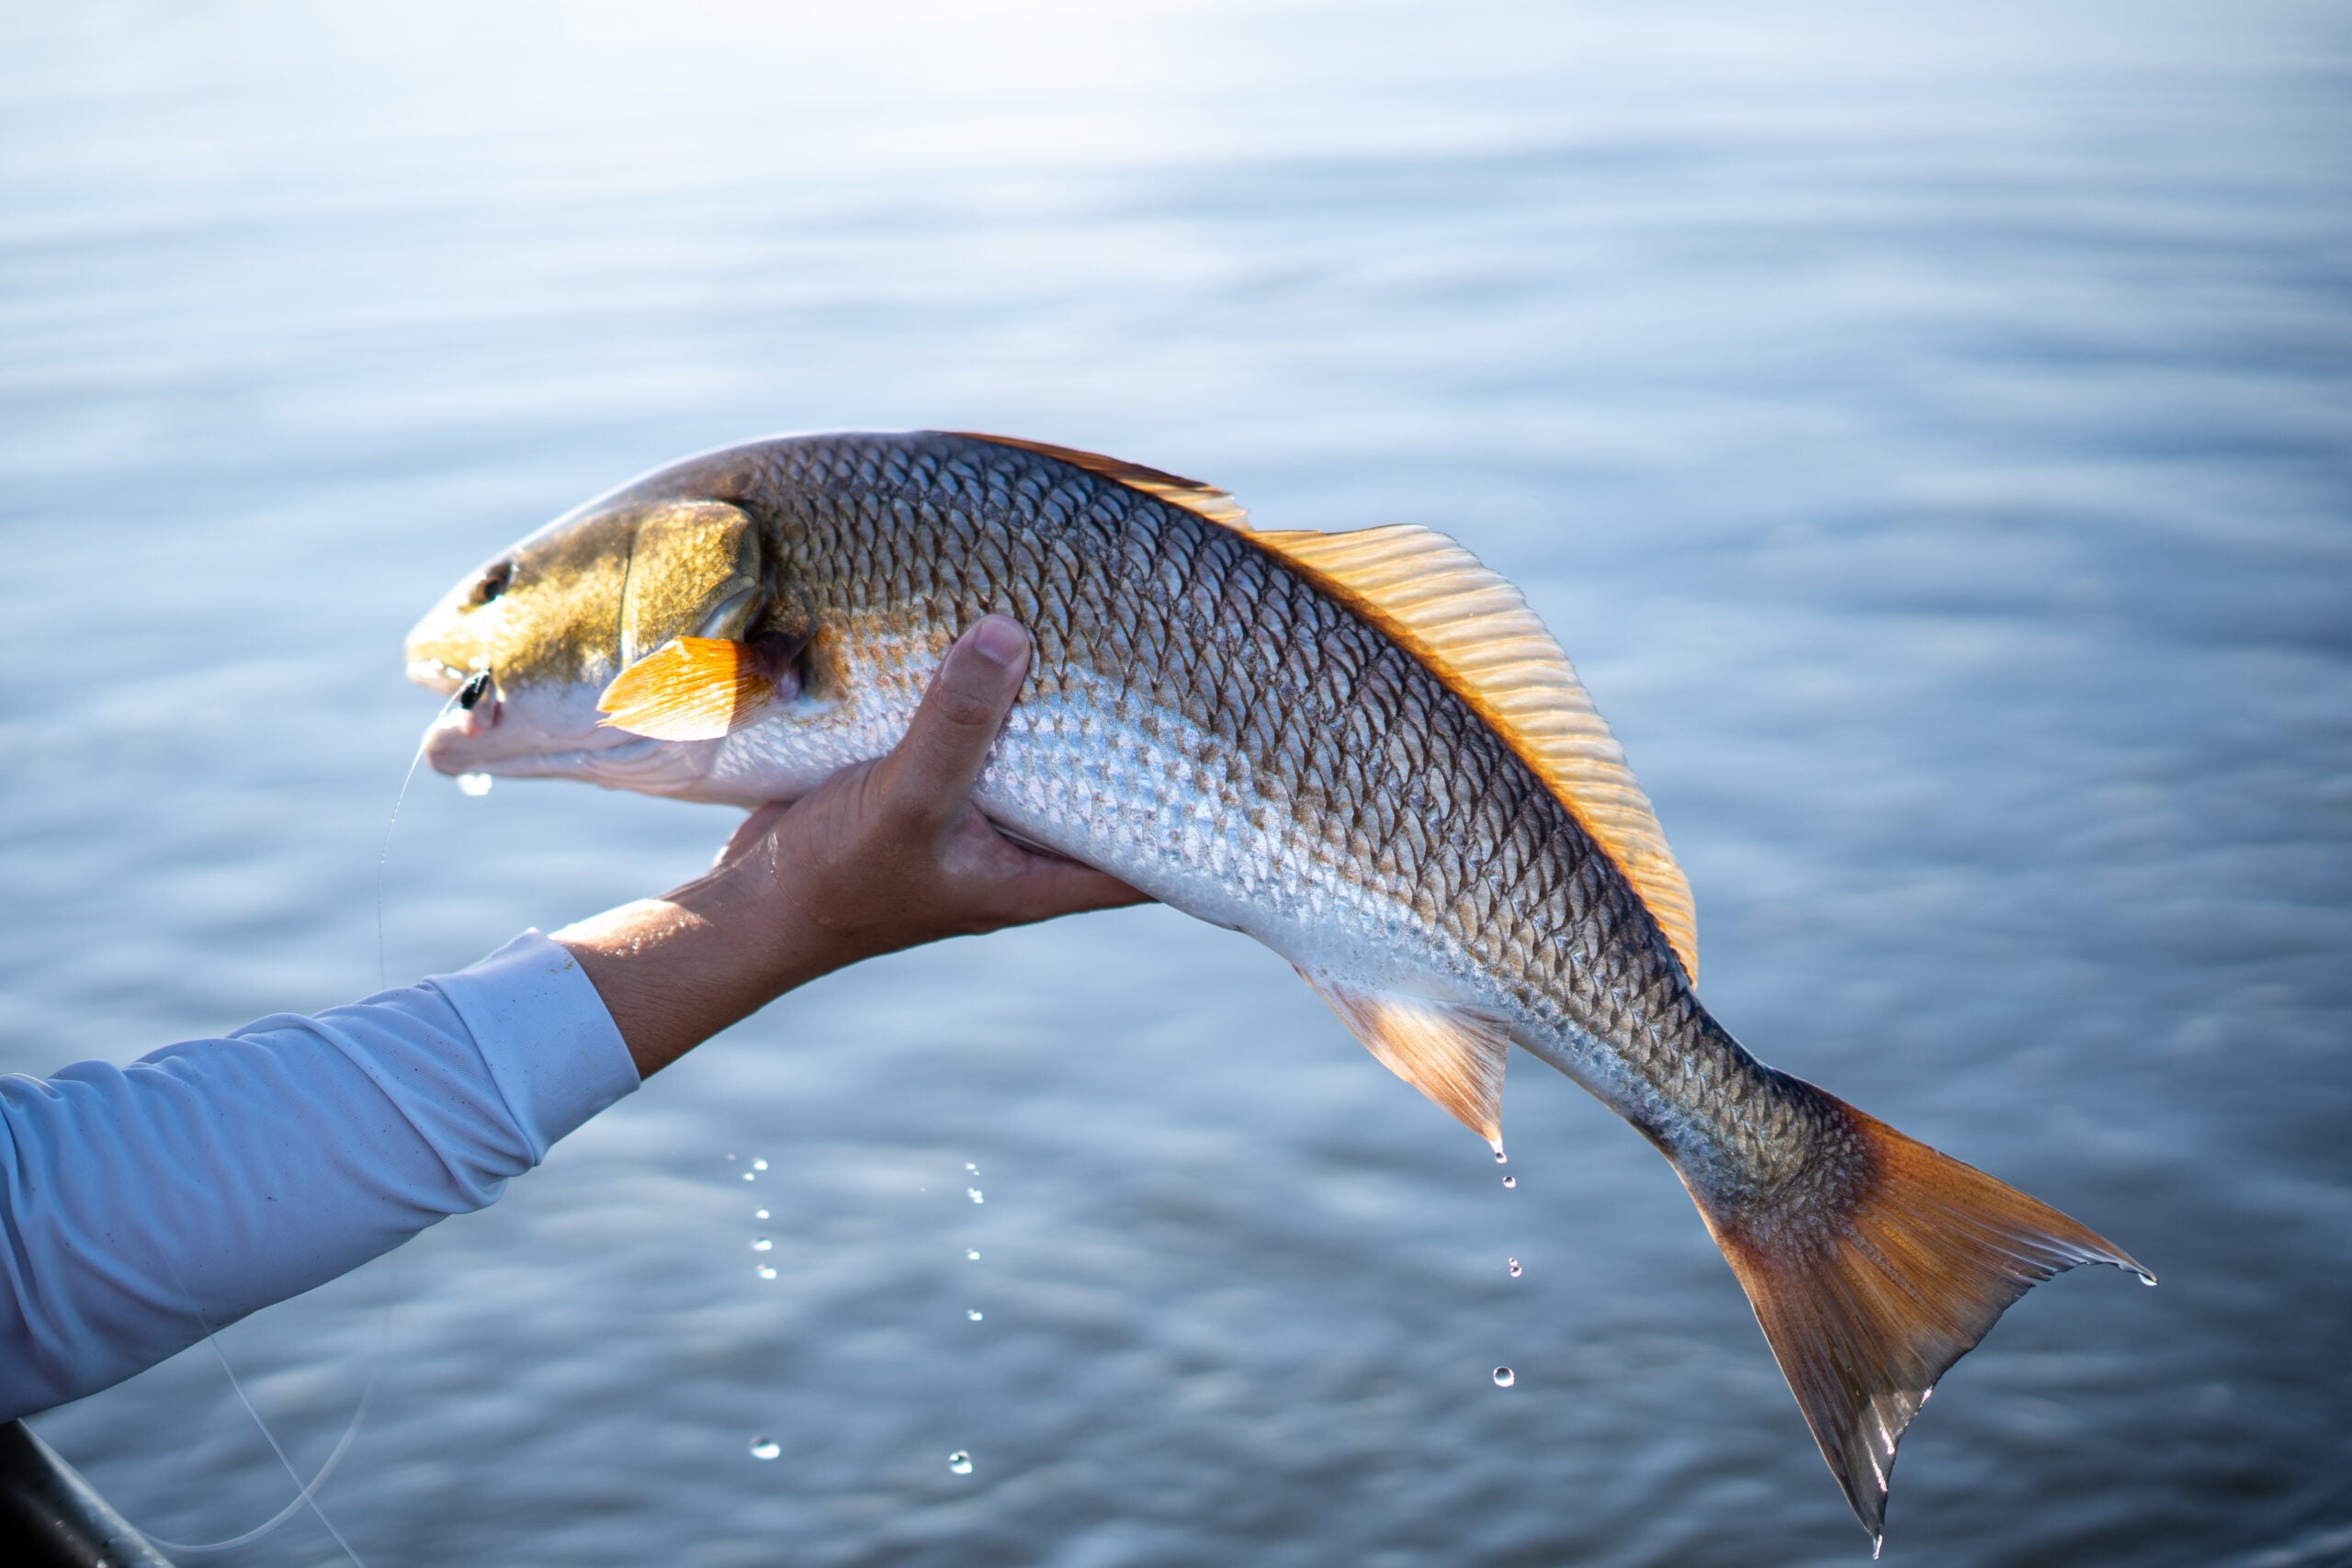 photo of redfish caught by angler